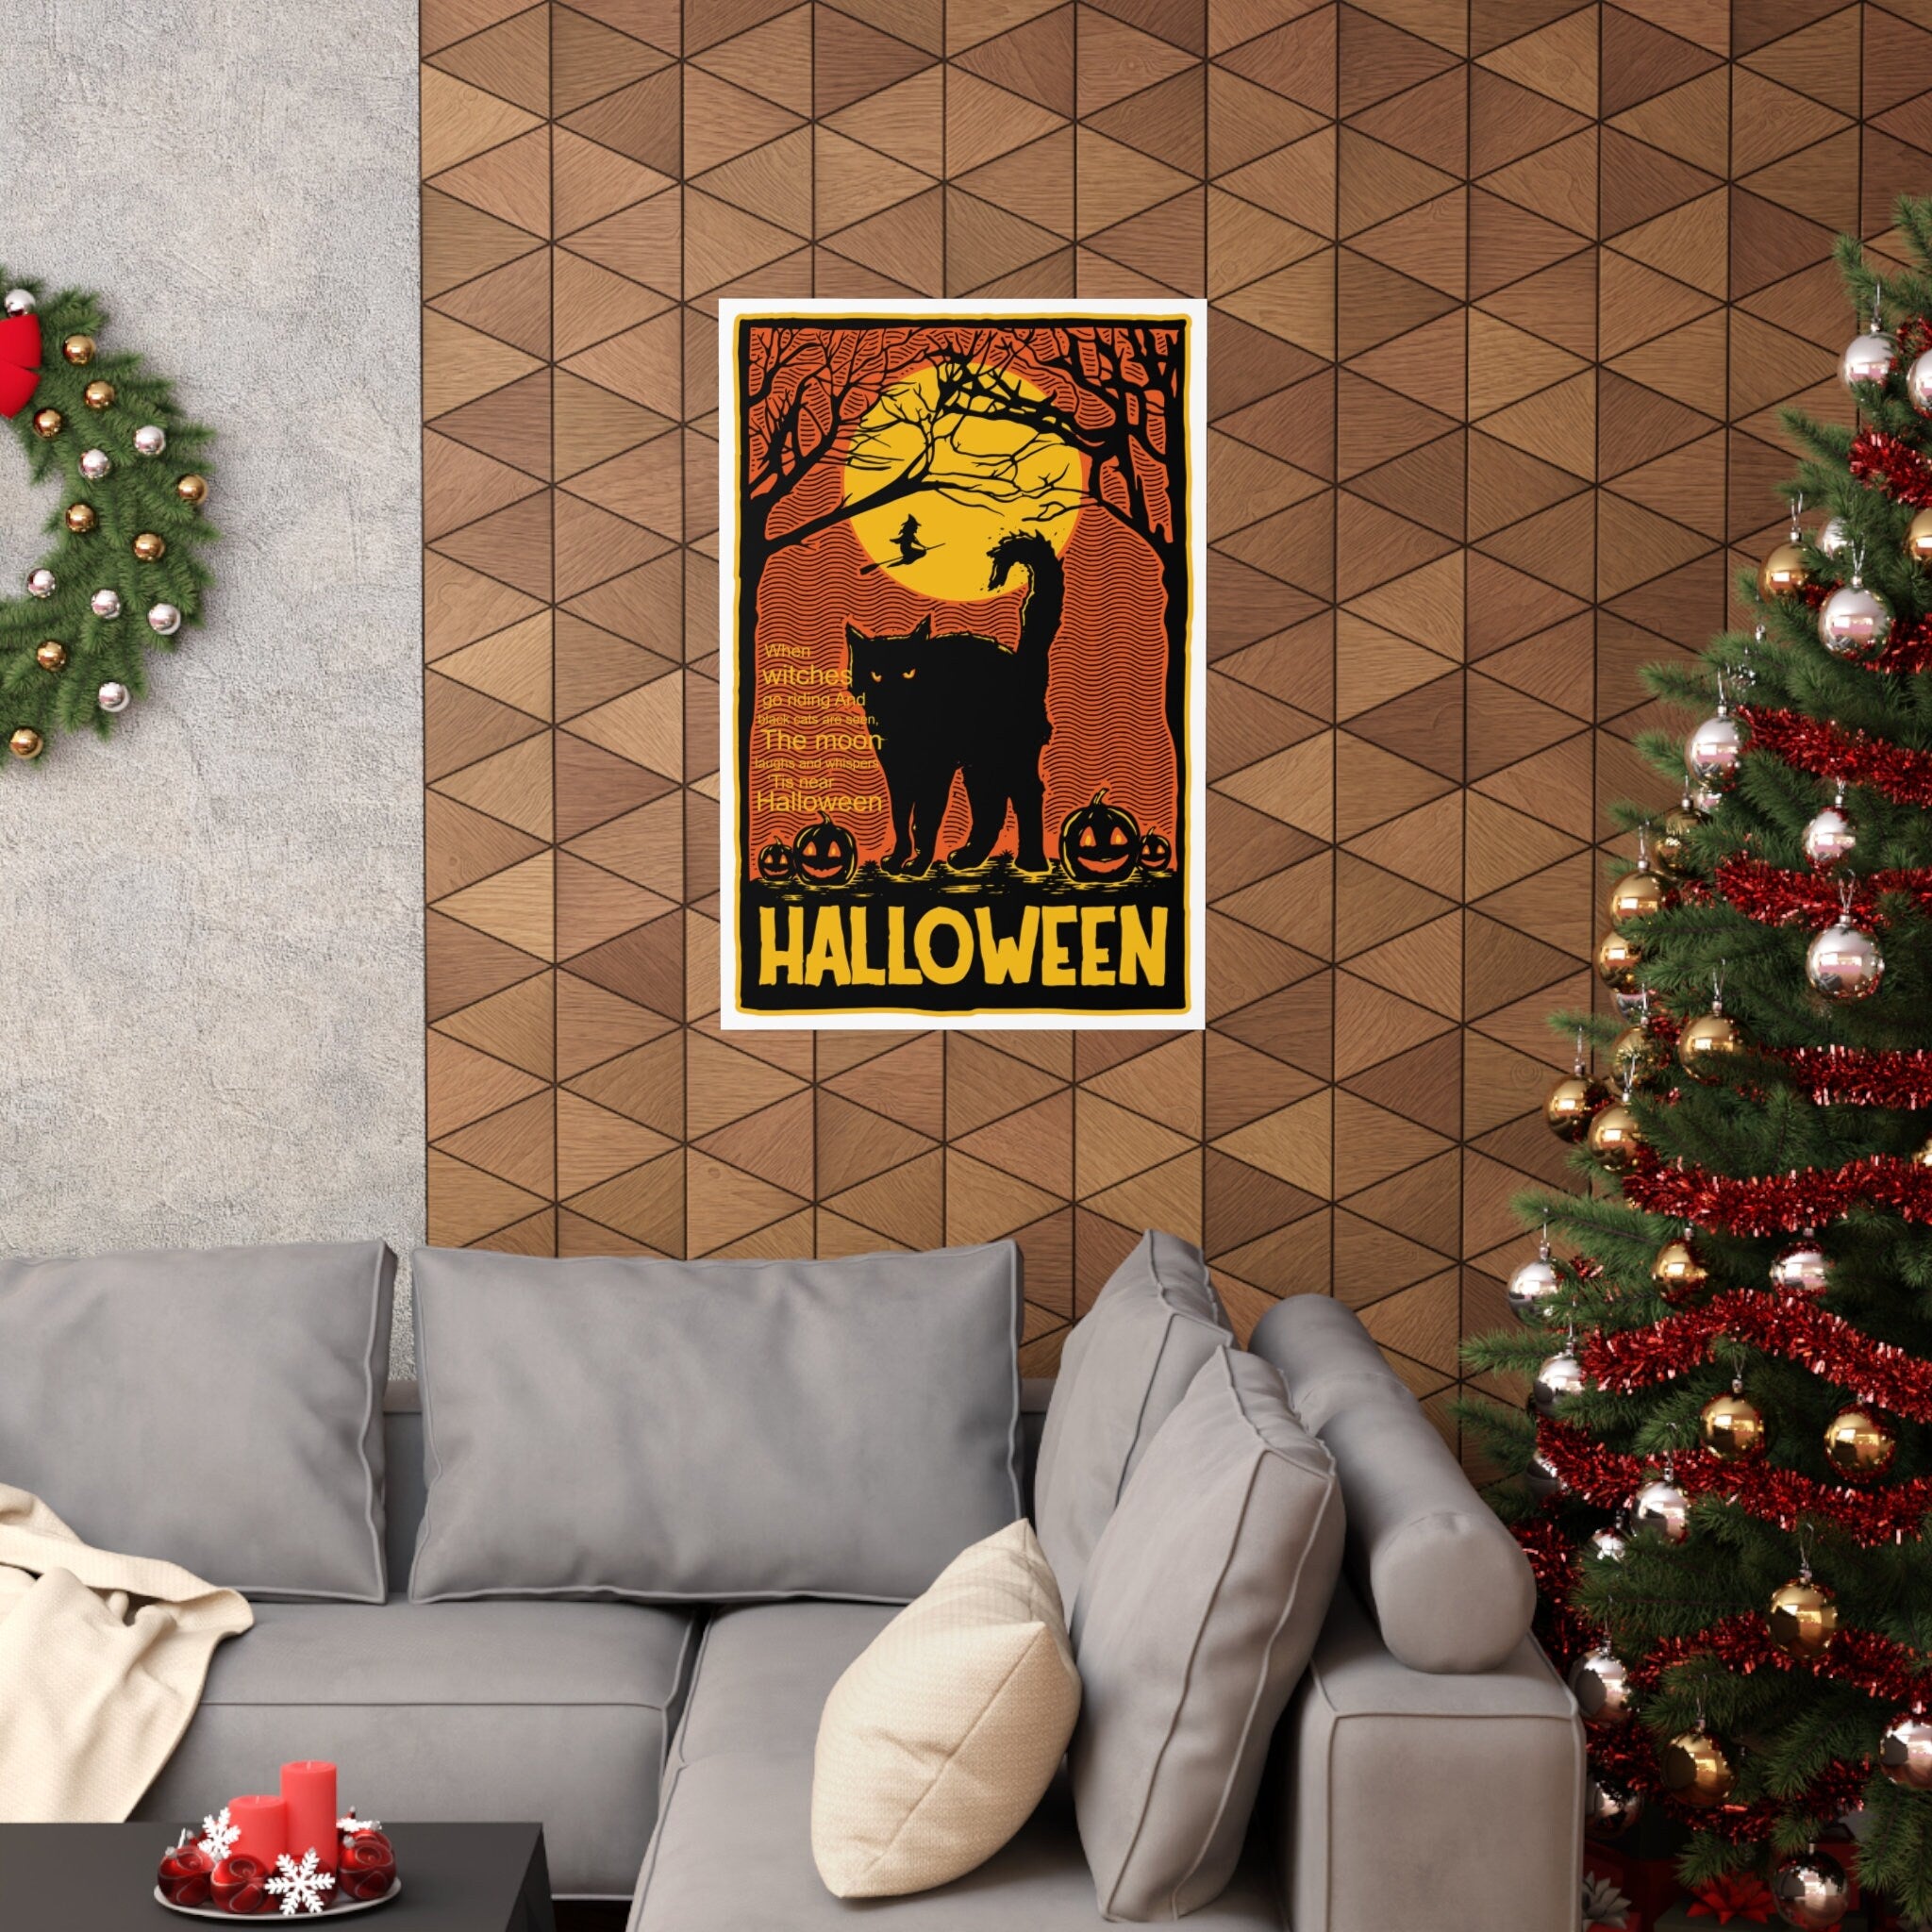 Tis Near Halloween Premium Matte Poster | PRINTED and SHIPPED | Mailed Prints Mailed Wall Art Decor | Halloween Prints Wall Art